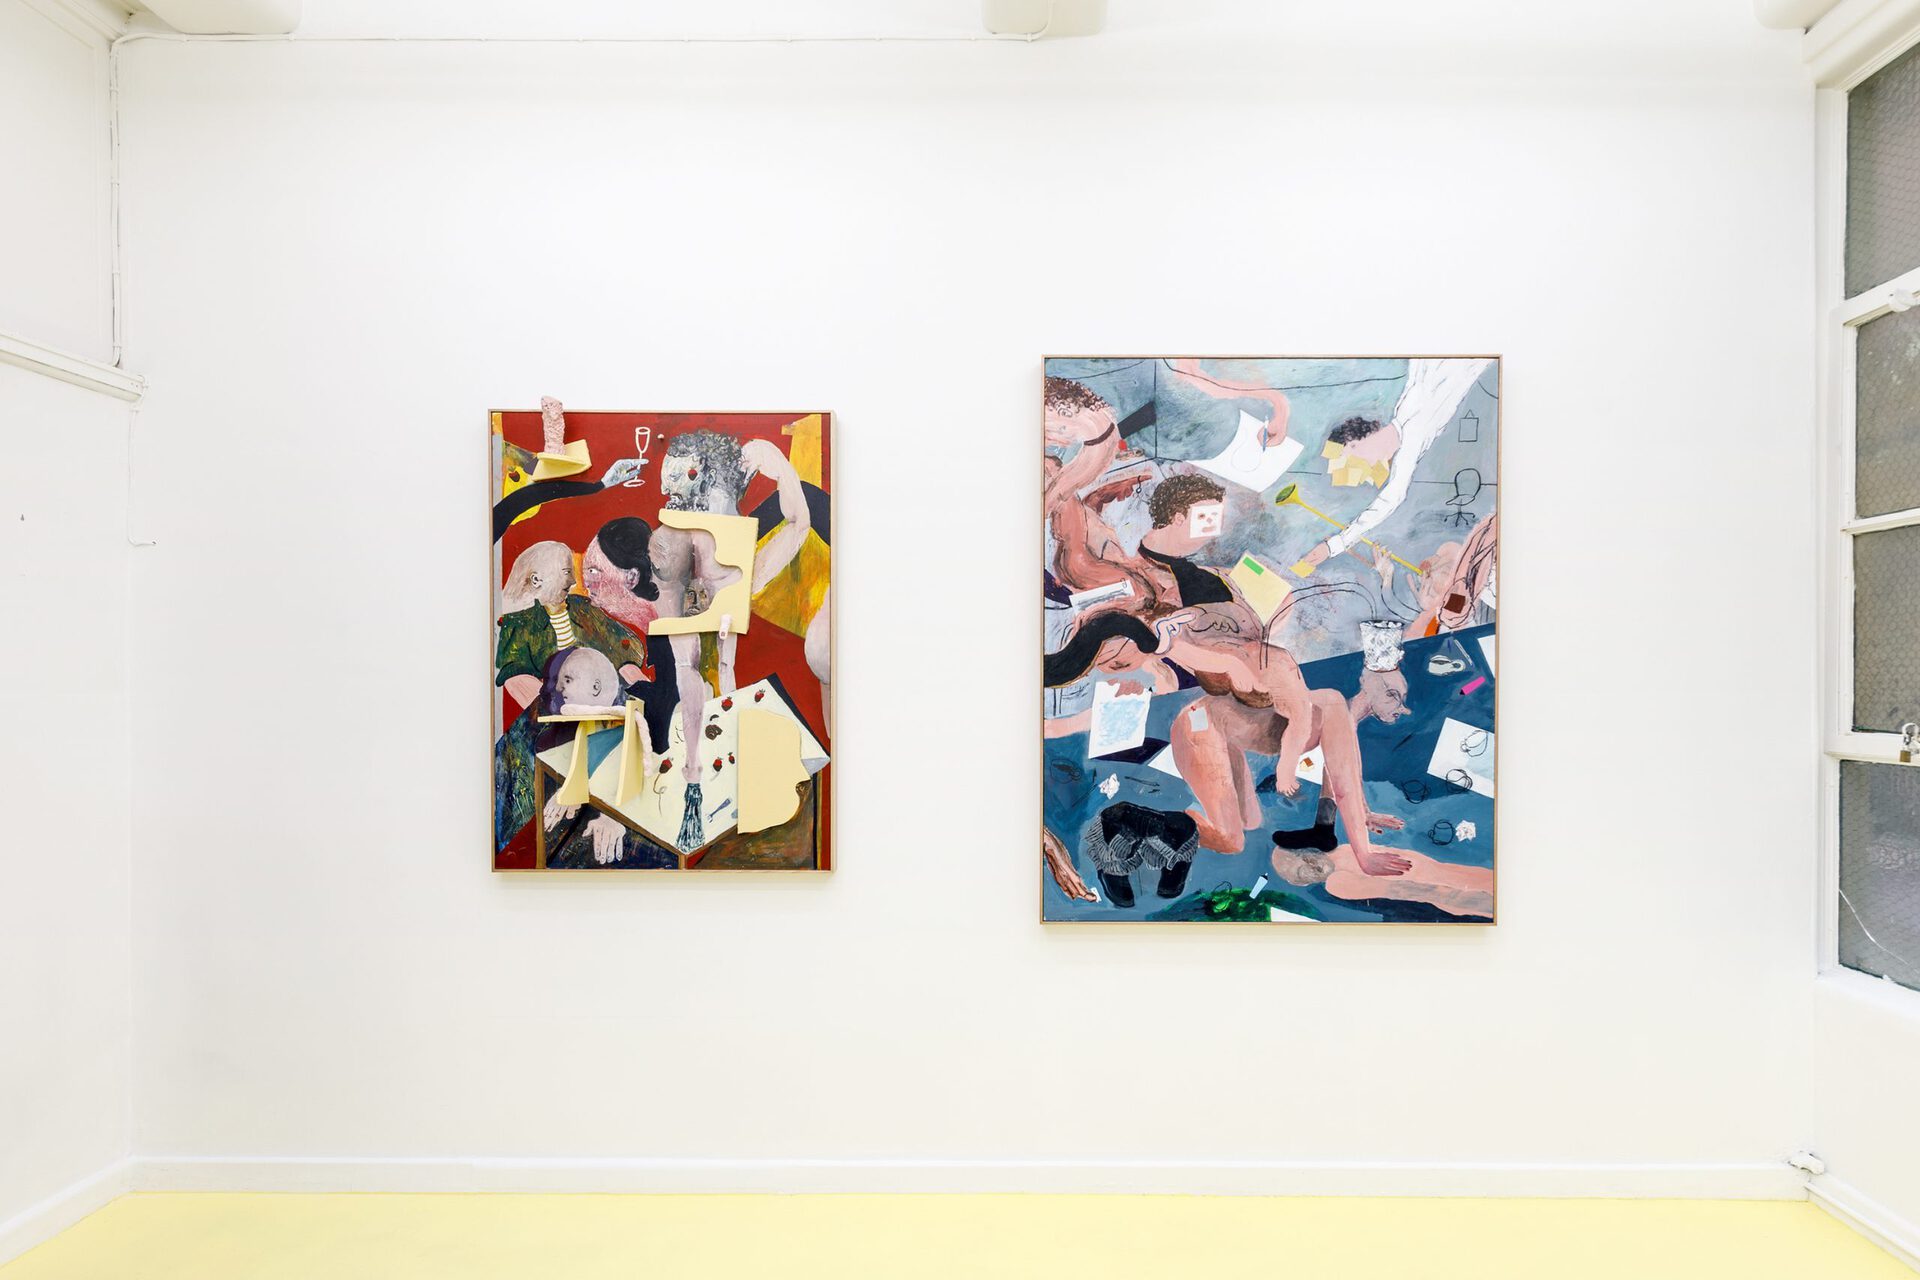 Nick Modrzewski, From left to right: A Landlord's Right of Entry, 2020, Acrylic, charcoal, wood, paper-mache and plaster on board, 89.9 x 121.6 cm and Ceremony at the Land Titles Office, 2020, Acrylic and charcoal on board, 120 x 150 cm